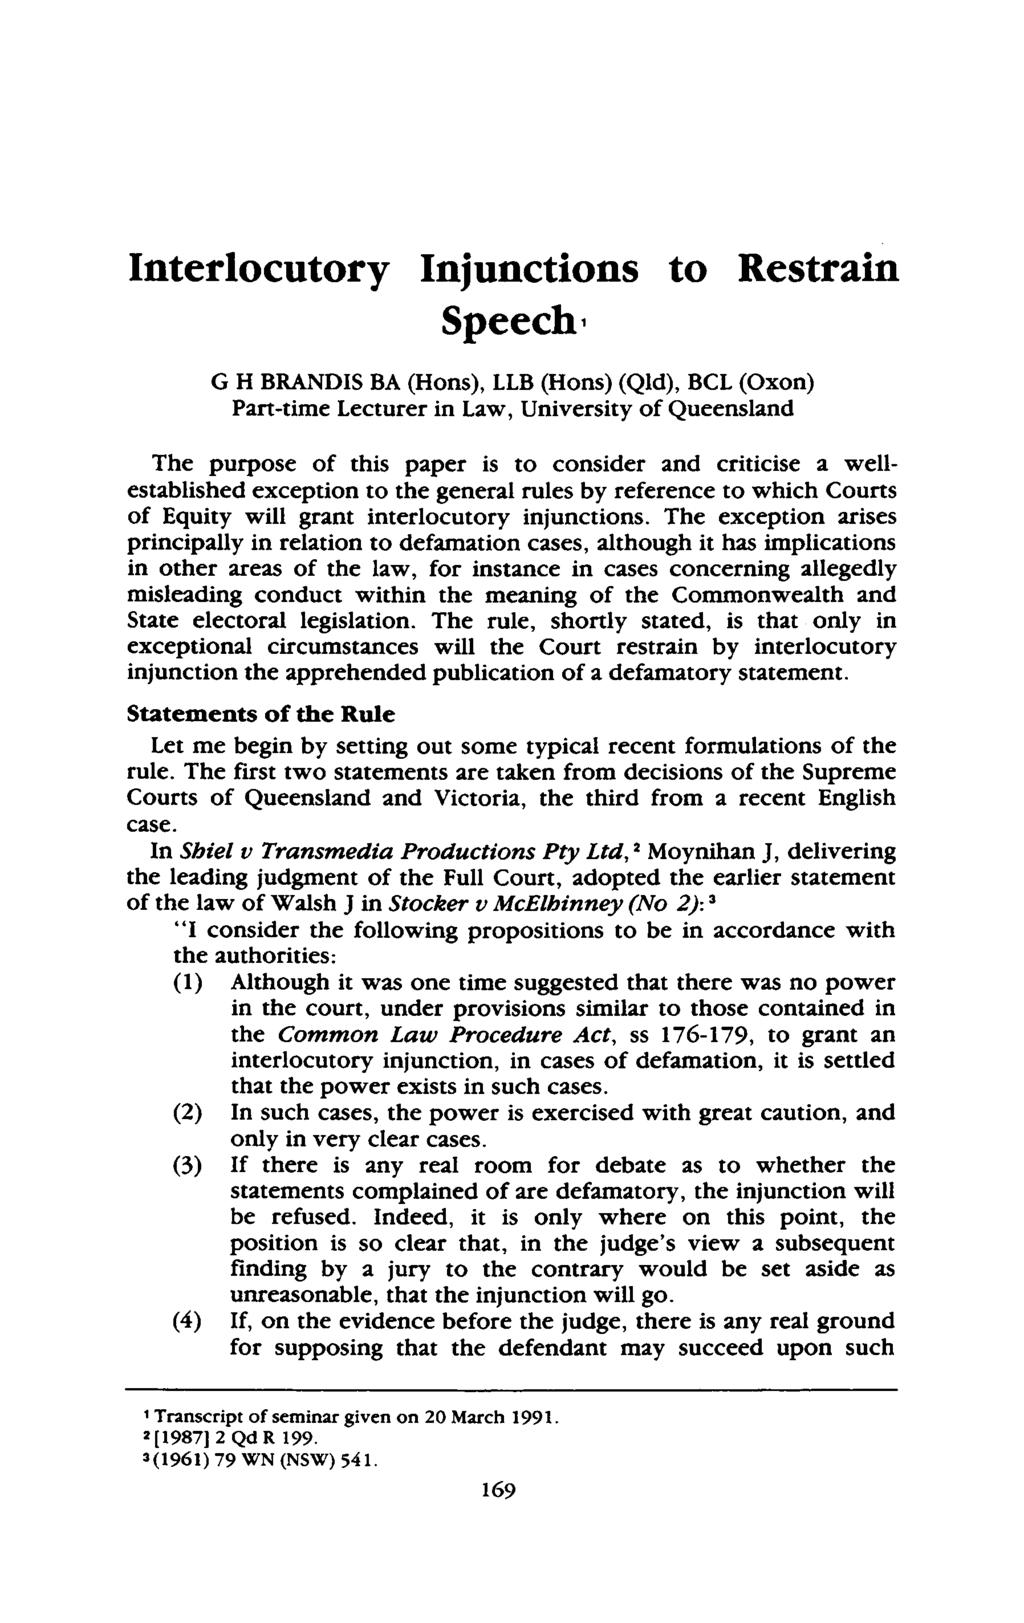 Interlocutory Injunctions to Restrain Speech* G H BRANDIS BA (Hons), LLB (Hons) (QId), BCL (Oxon) Part time Lecturer in Law, University of Queensland The purpose of this paper is to consider and